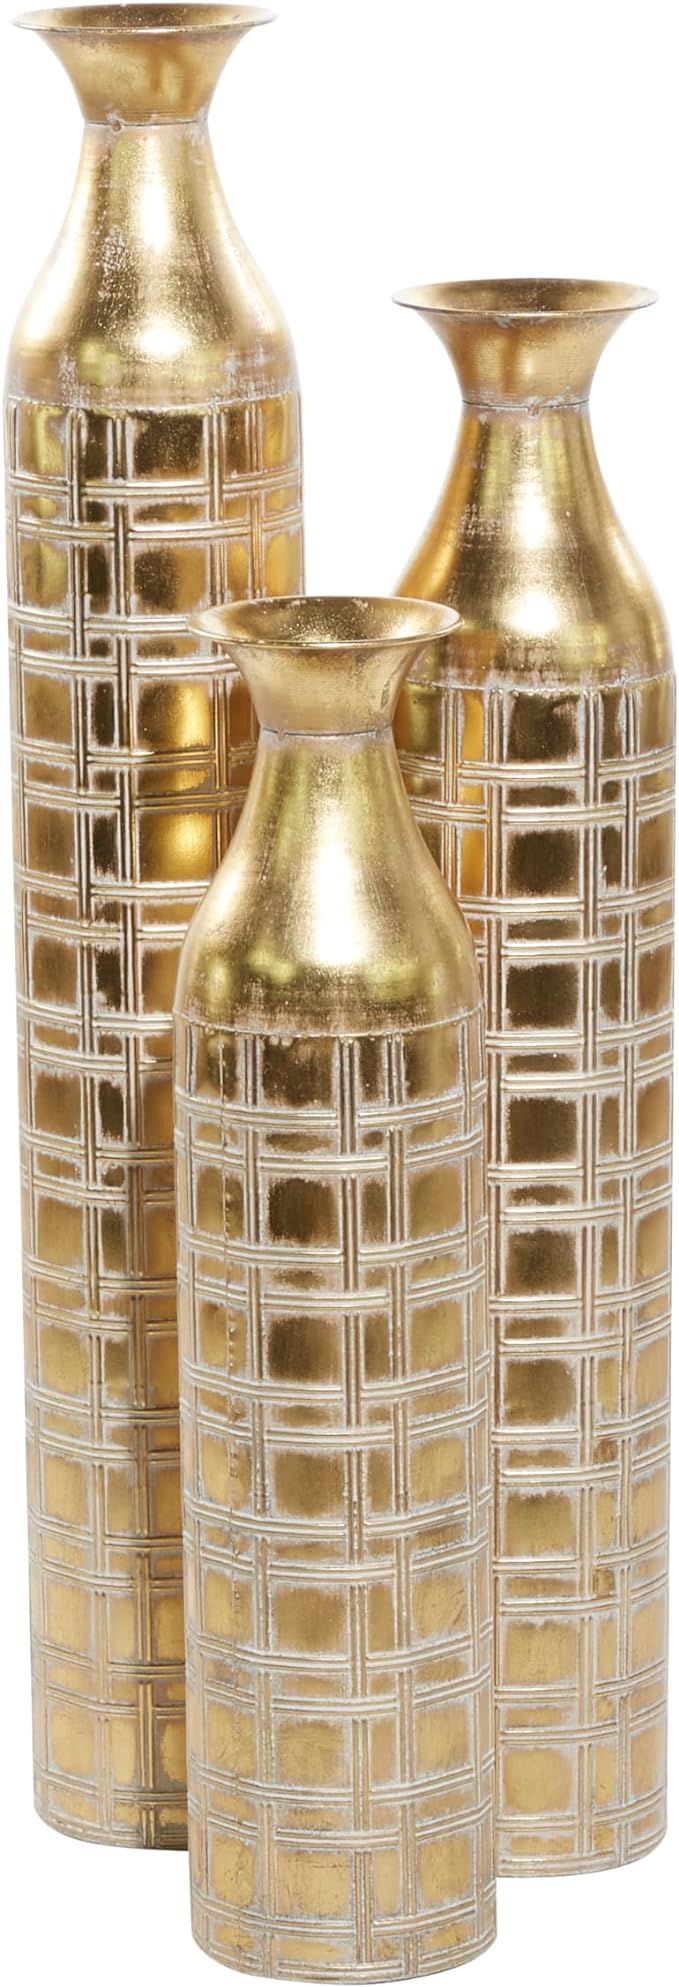 Deco 79 Metal Tall Distressed Metallic Vase with Etched Grid Patterns, Set of 3 35", 30", 25"H, G... | Amazon (US)